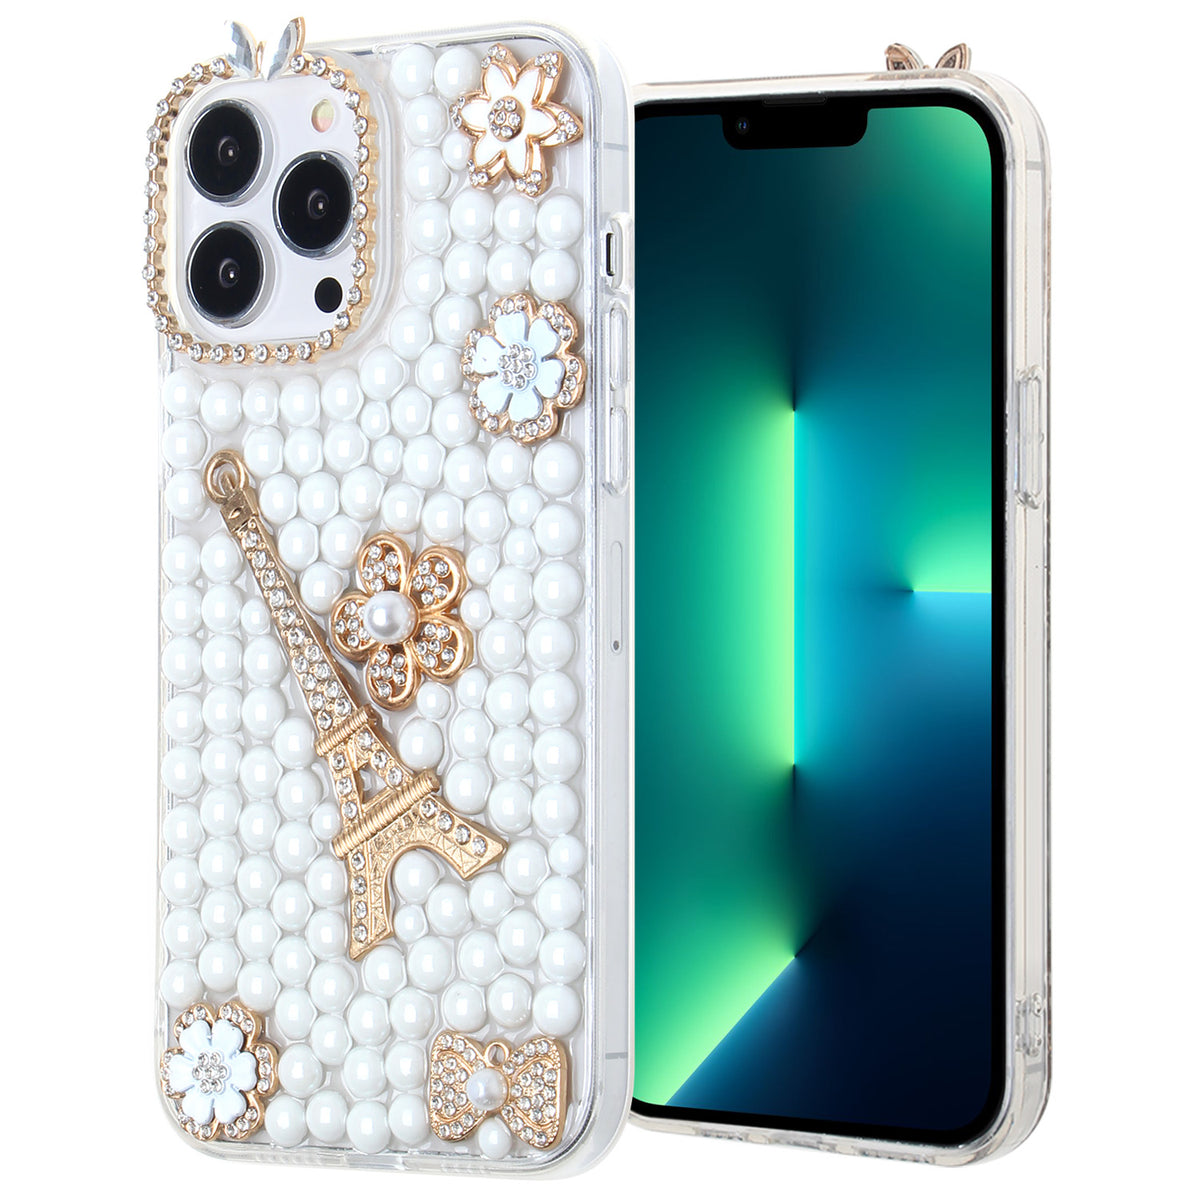 Iphone 11 (6.1Inch) White Pearl Diamond Case with Eiffel